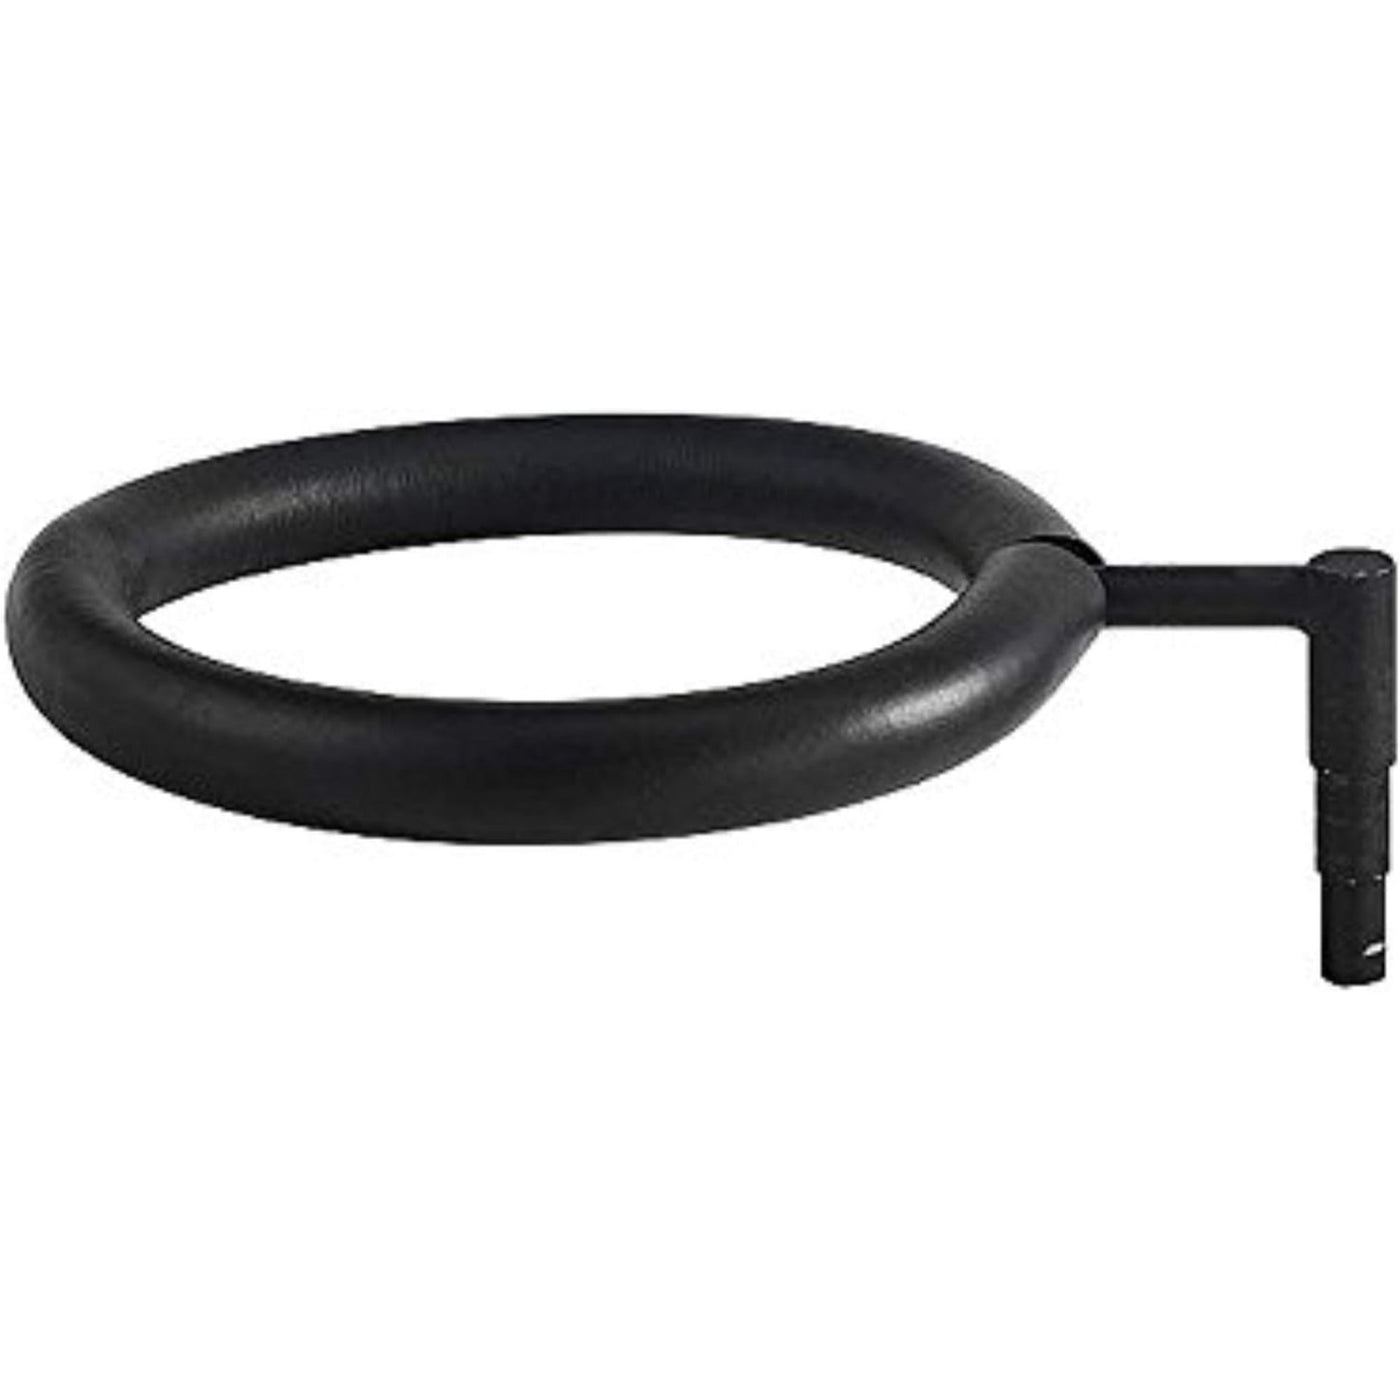 Remo DY-3350-DK Adapter Ring for Doumbek